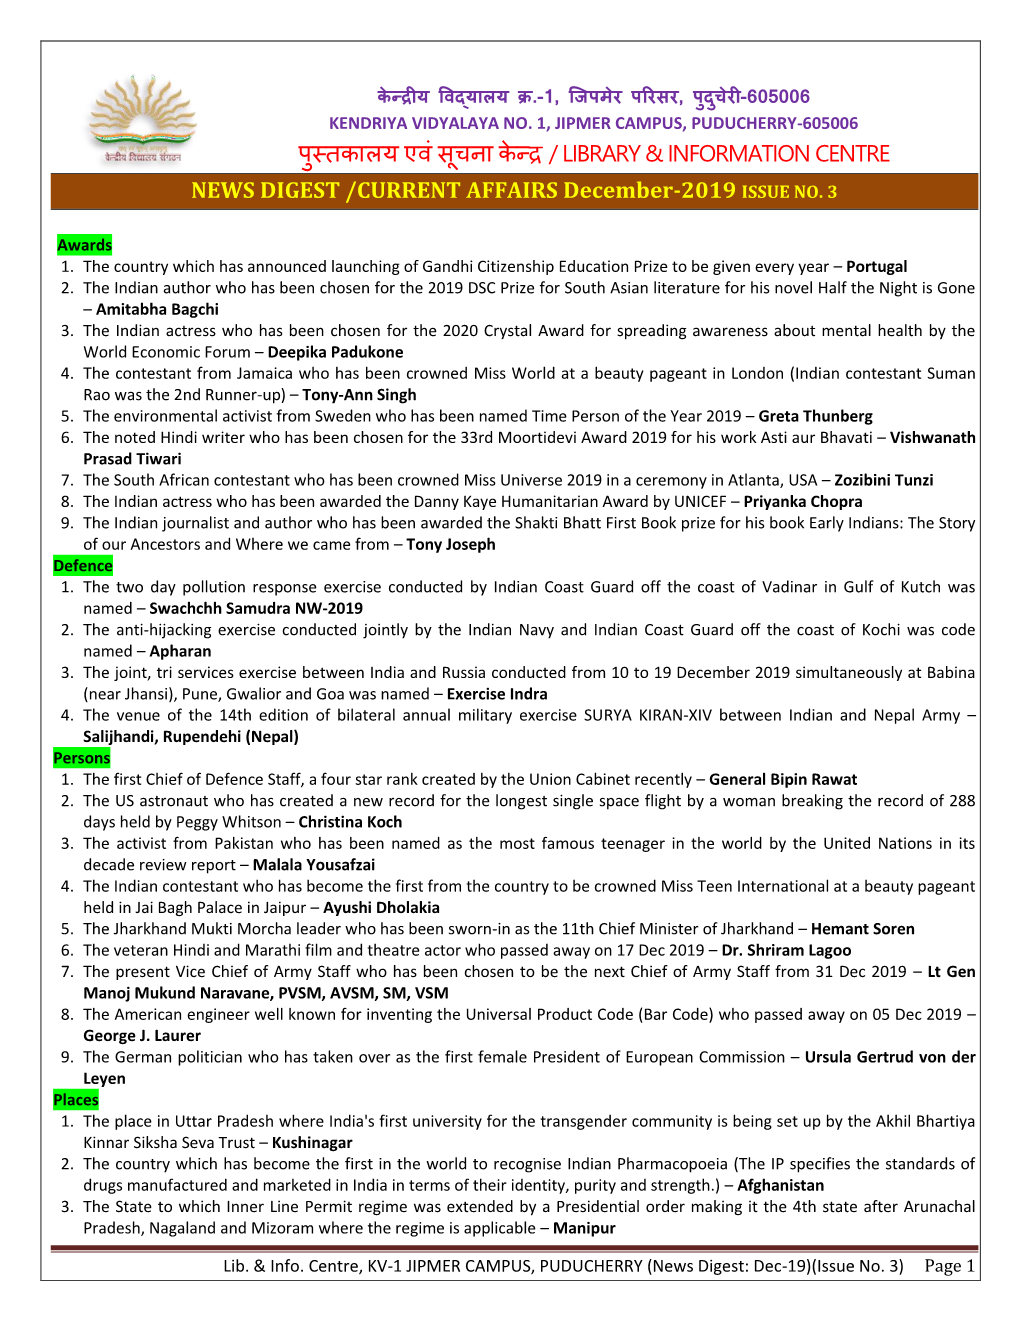 NEWS DIGEST /CURRENT AFFAIRS December-2019 ISSUE NO. 3